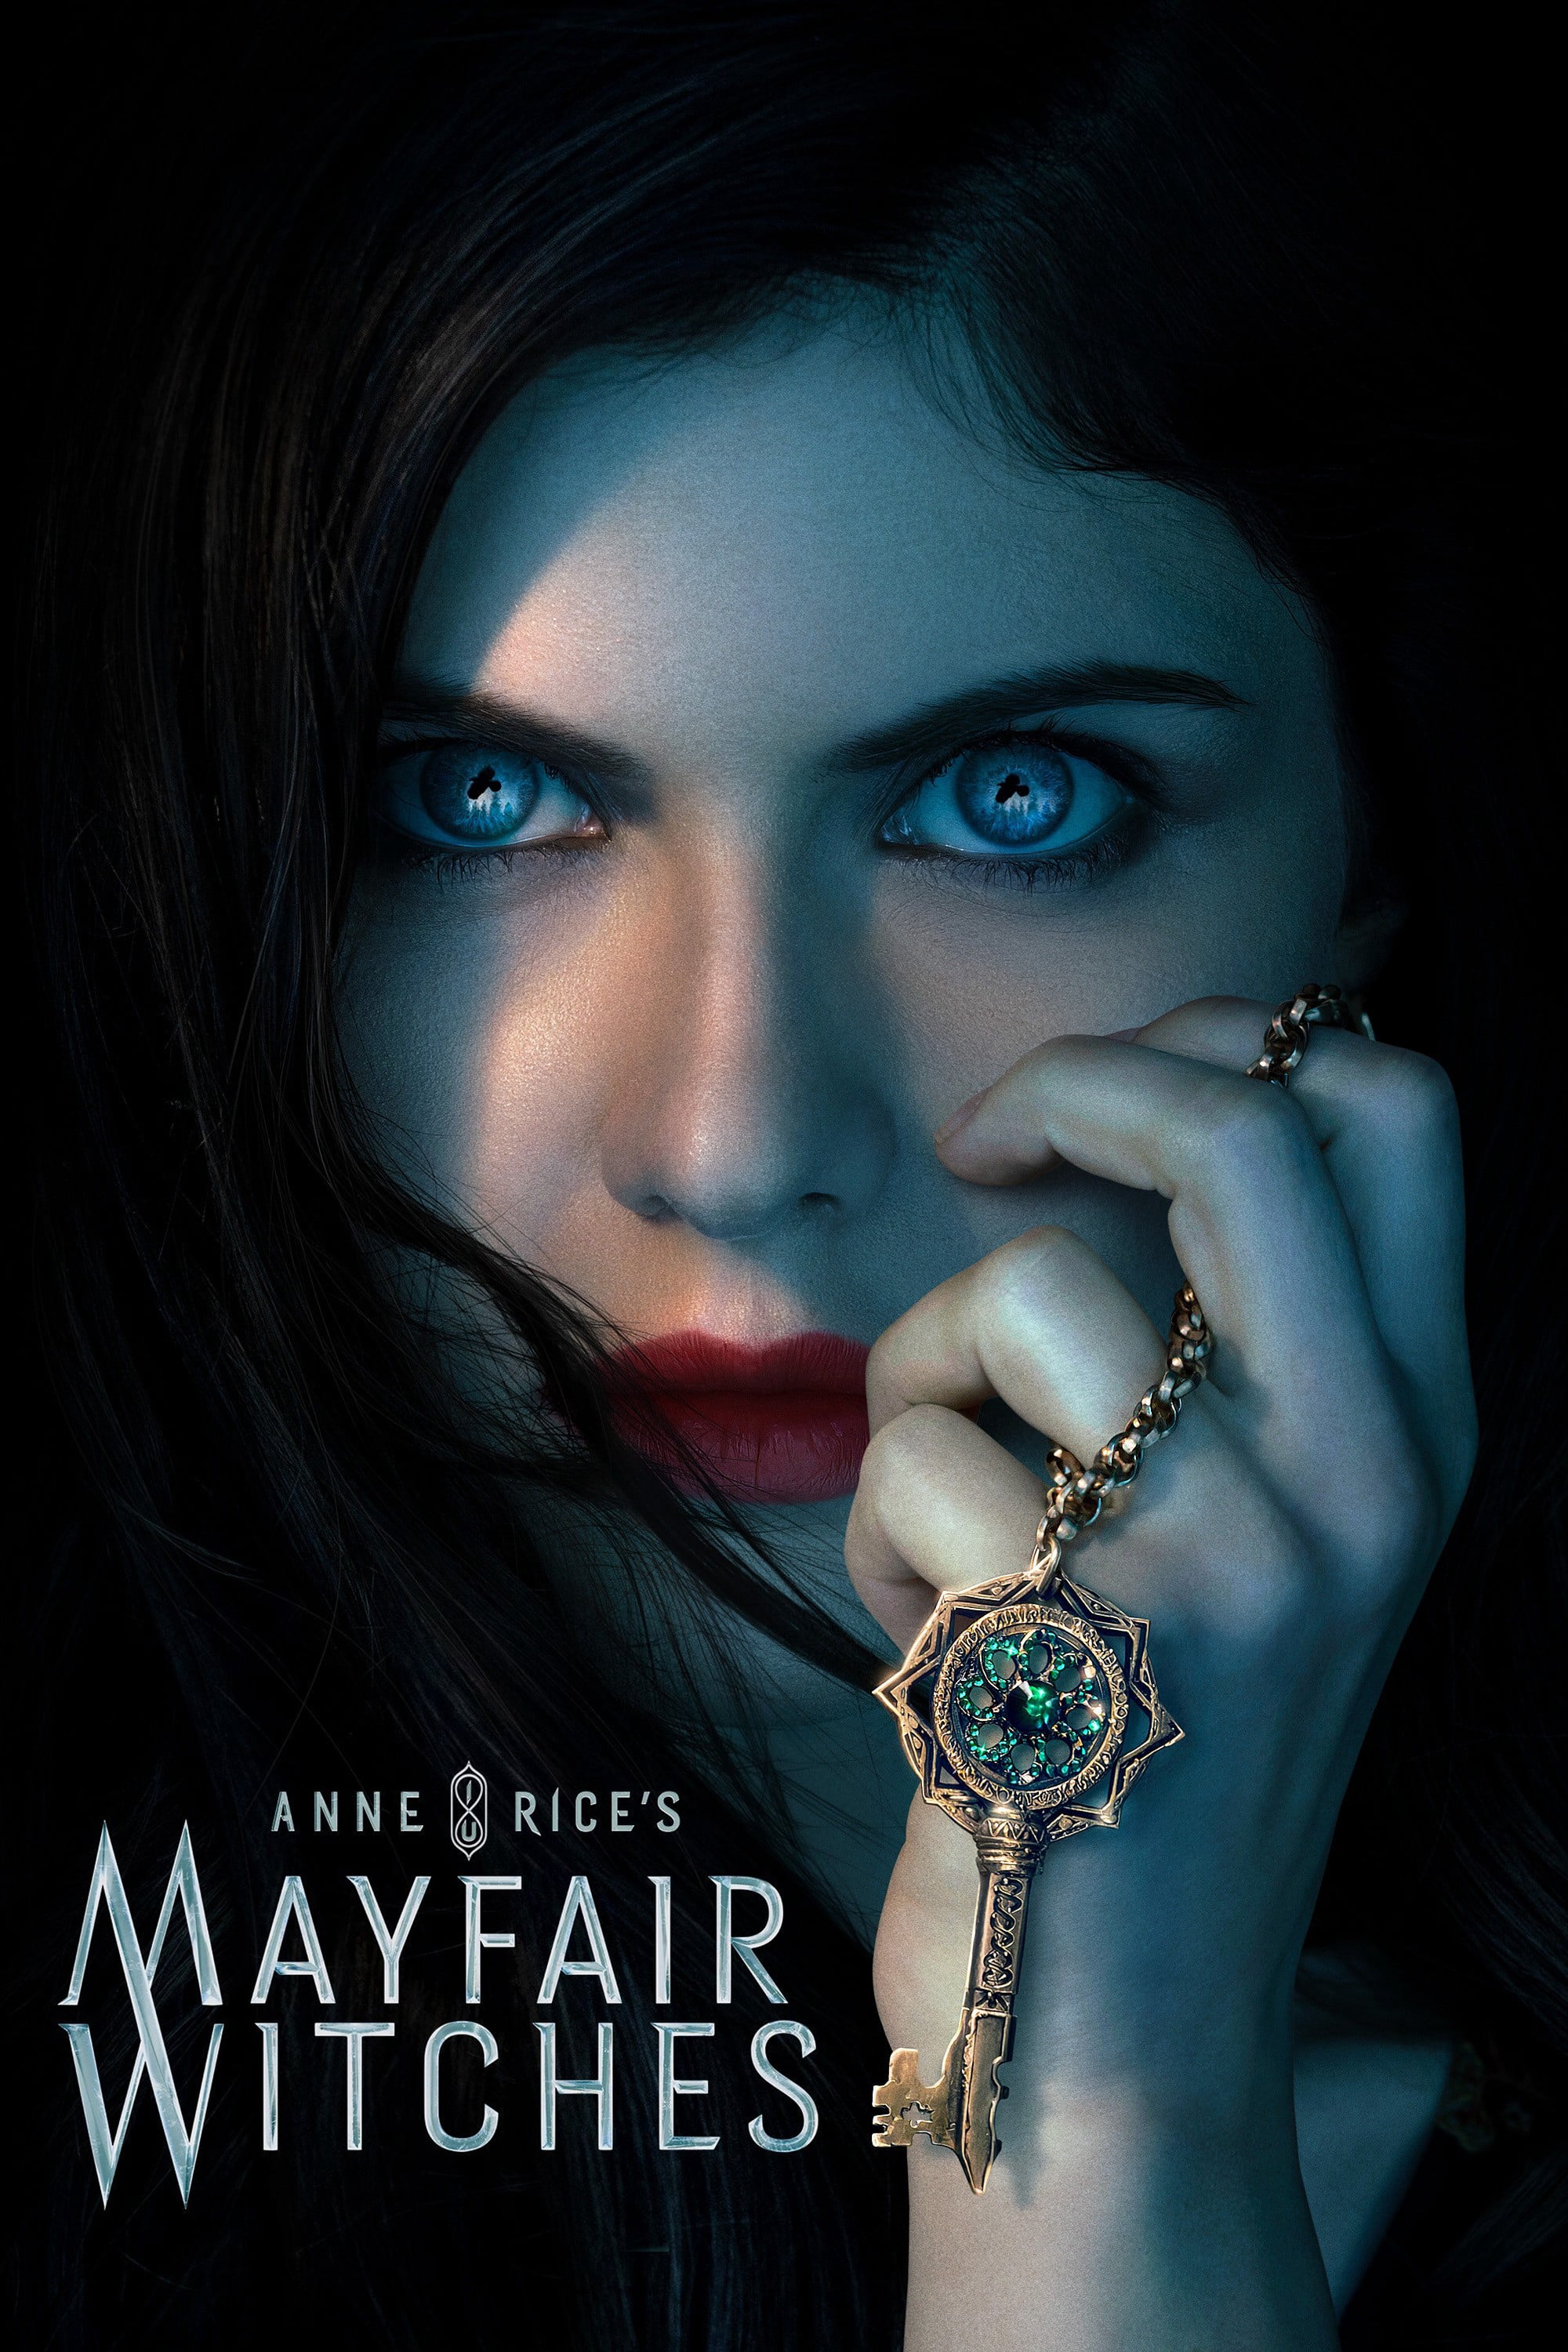 Poster Phim Phù Thủy Mayfair (Anne Rice's Mayfair Witches)